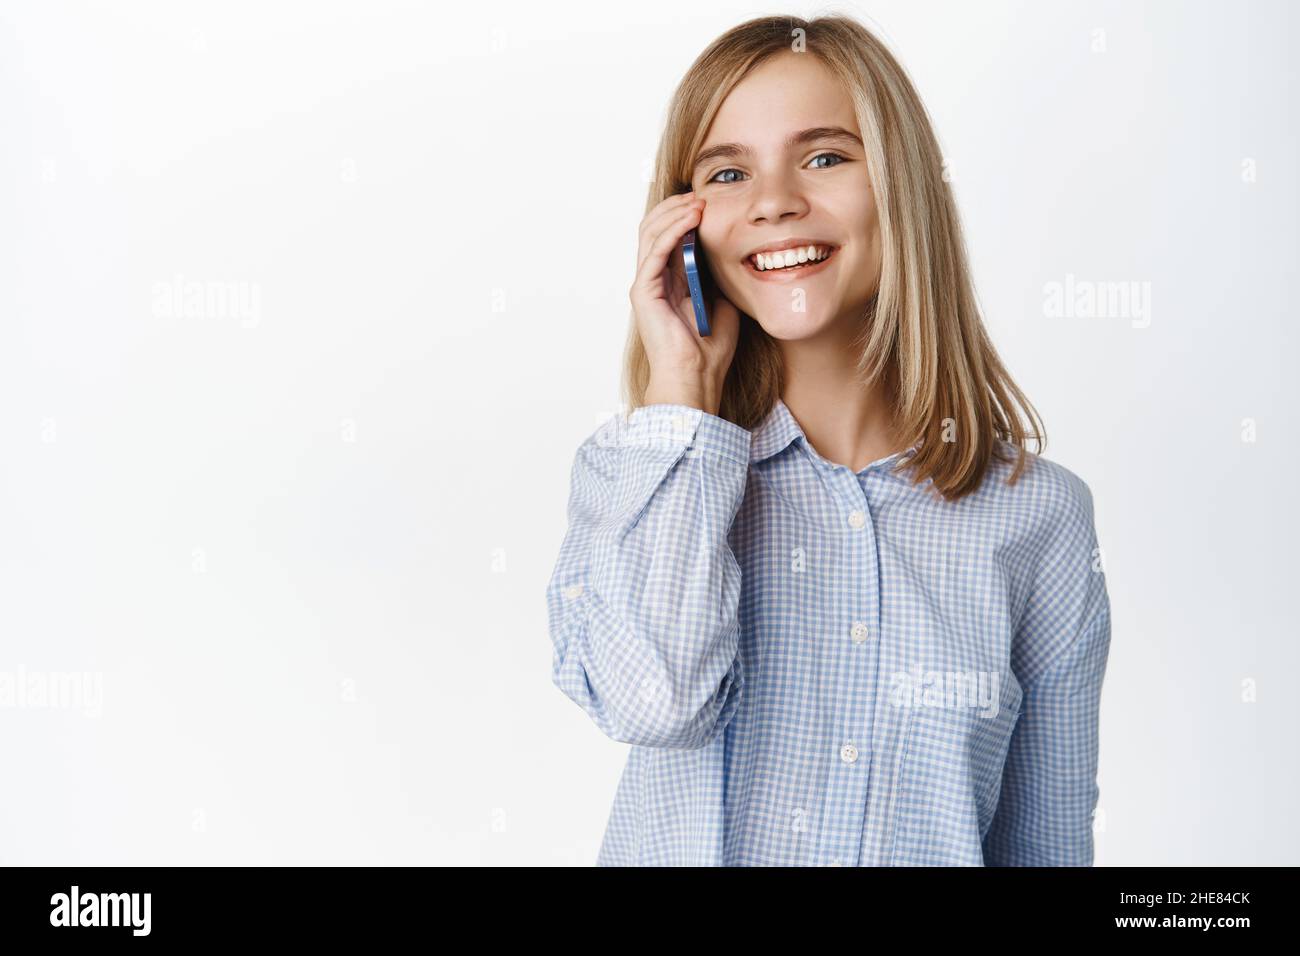 Cute little girl, beautiful blond kid talking on mobile phone, having conversation on smartphone, answer a call, standing over white background Stock Photo